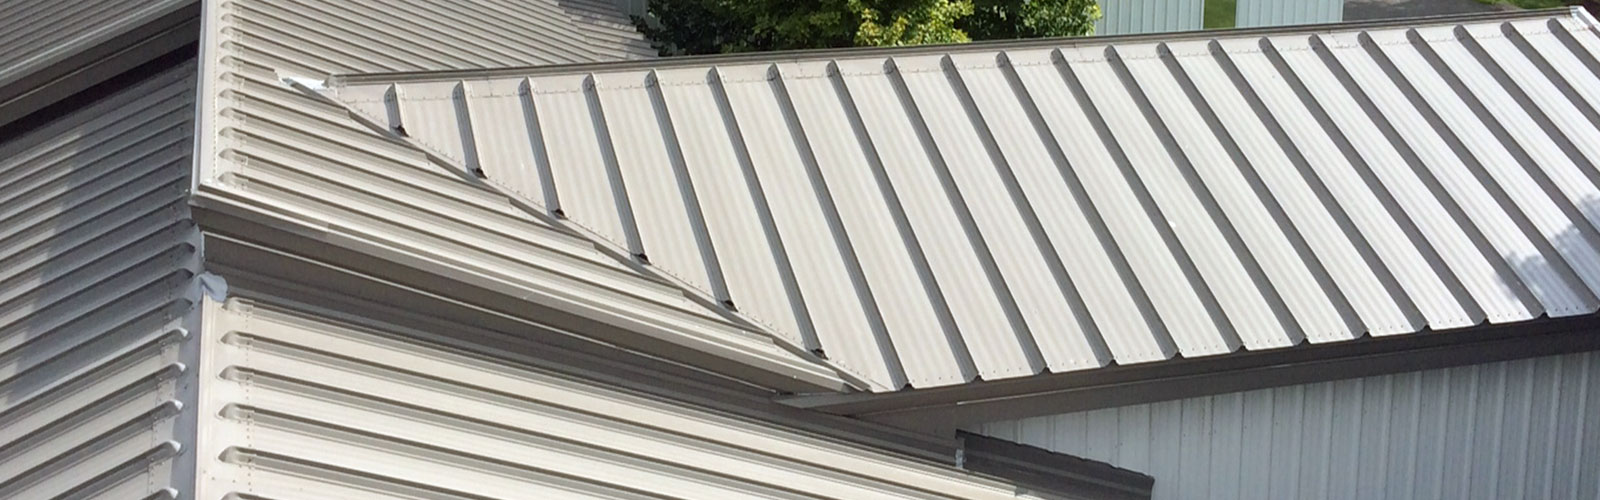 T-Roys Relief Roofing Images